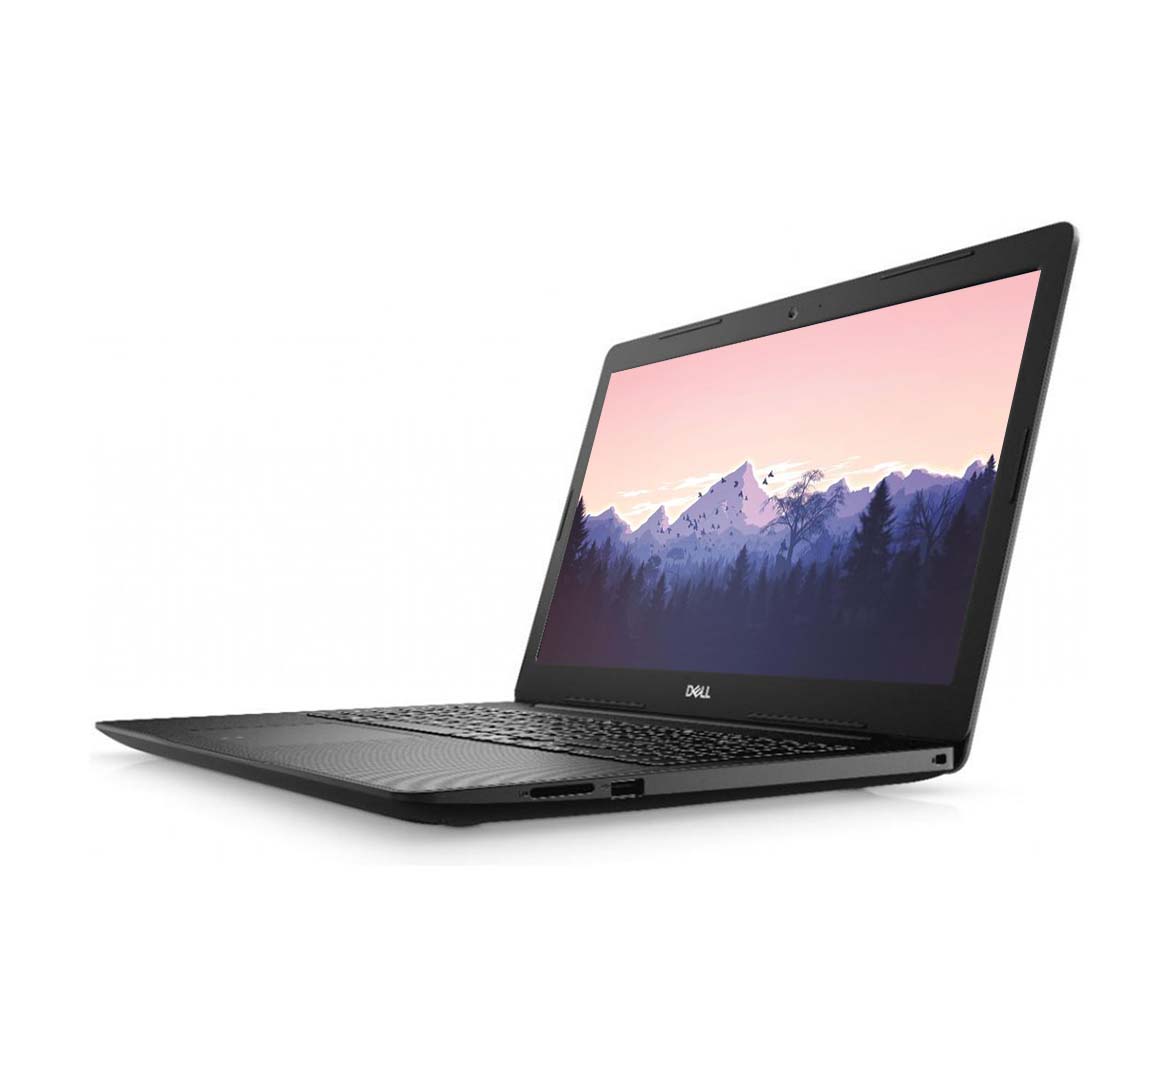 Dell Inspiron 3593 Business Laptop, Intel Core i5-10th Generation CPU, 8GB RAM, 256GB SSD , 15.4 inch Display